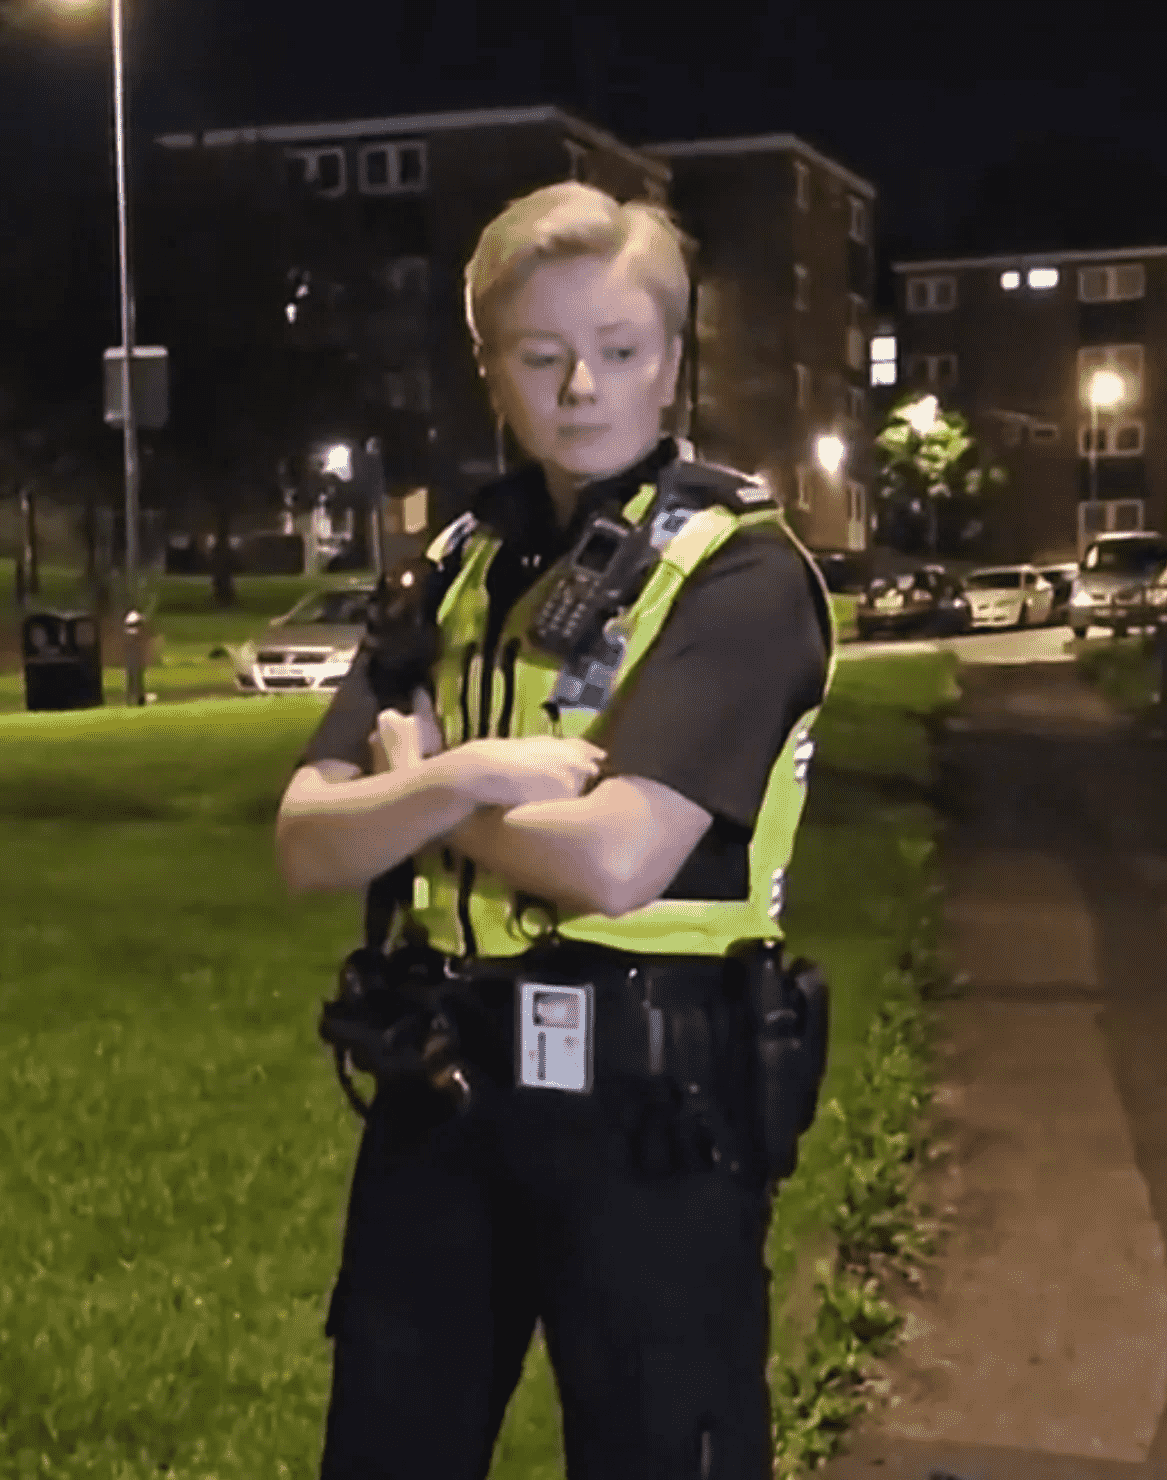 Police in the United Kingdom arrested an autistic teenager from West Yorkshire for homophobia after she said an officer looked like her lesbian grandmother.